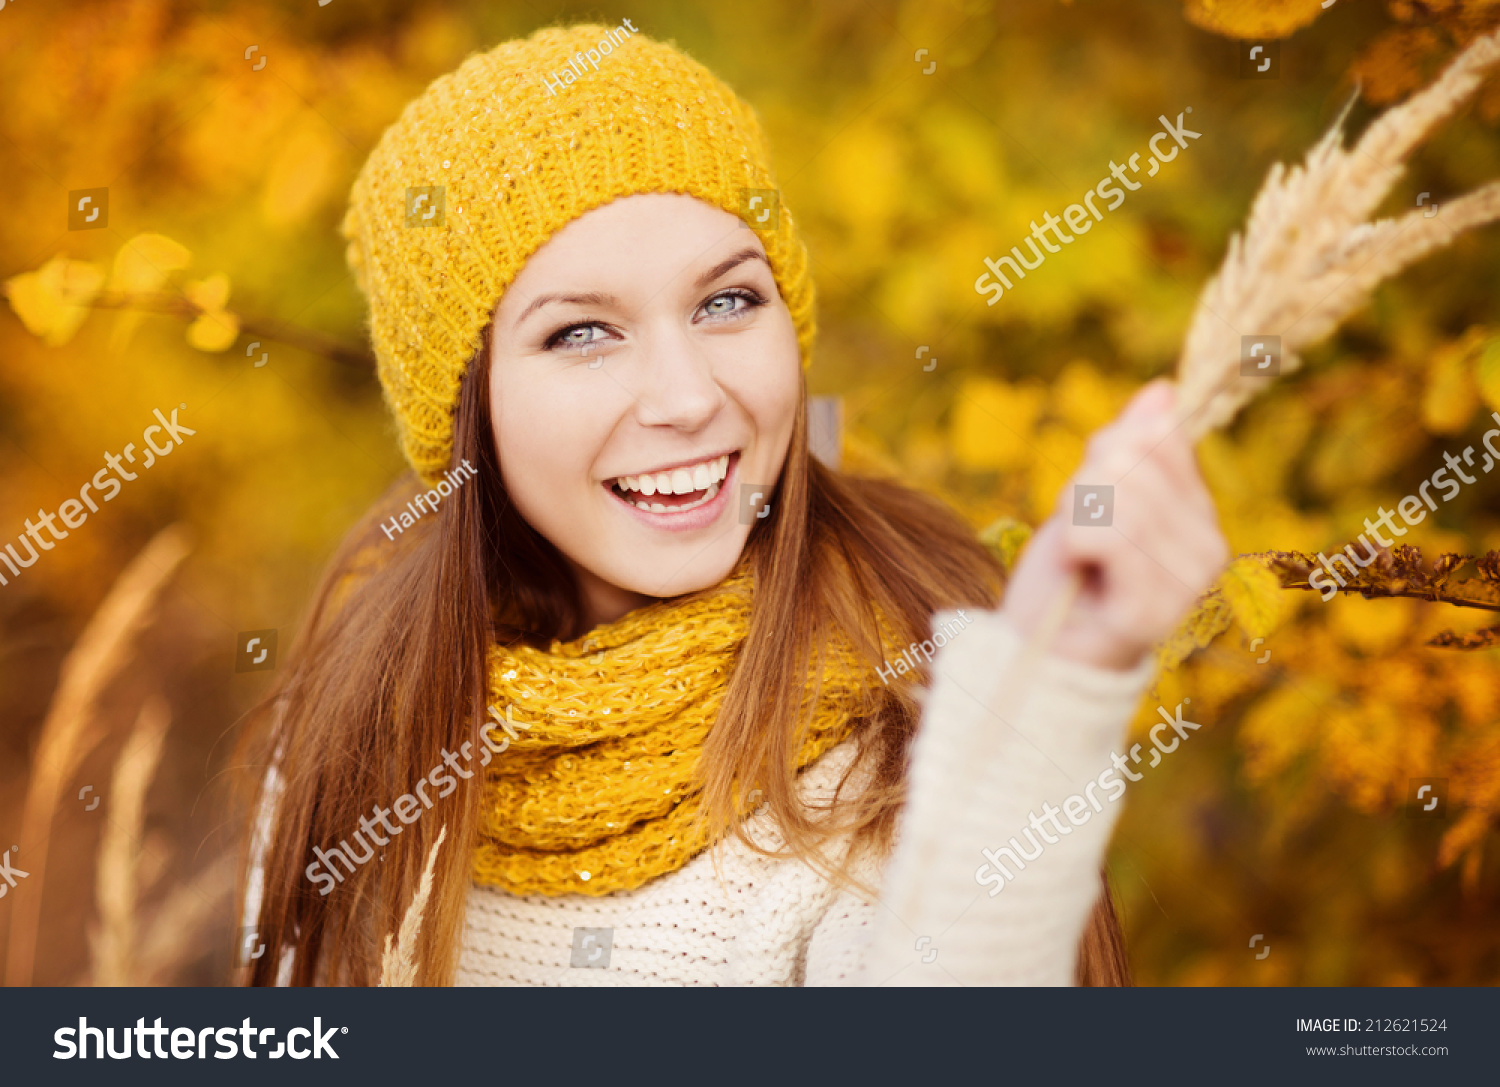 Portrait of beautiful girl with scarf and hat in yellow autumn nature #212621524